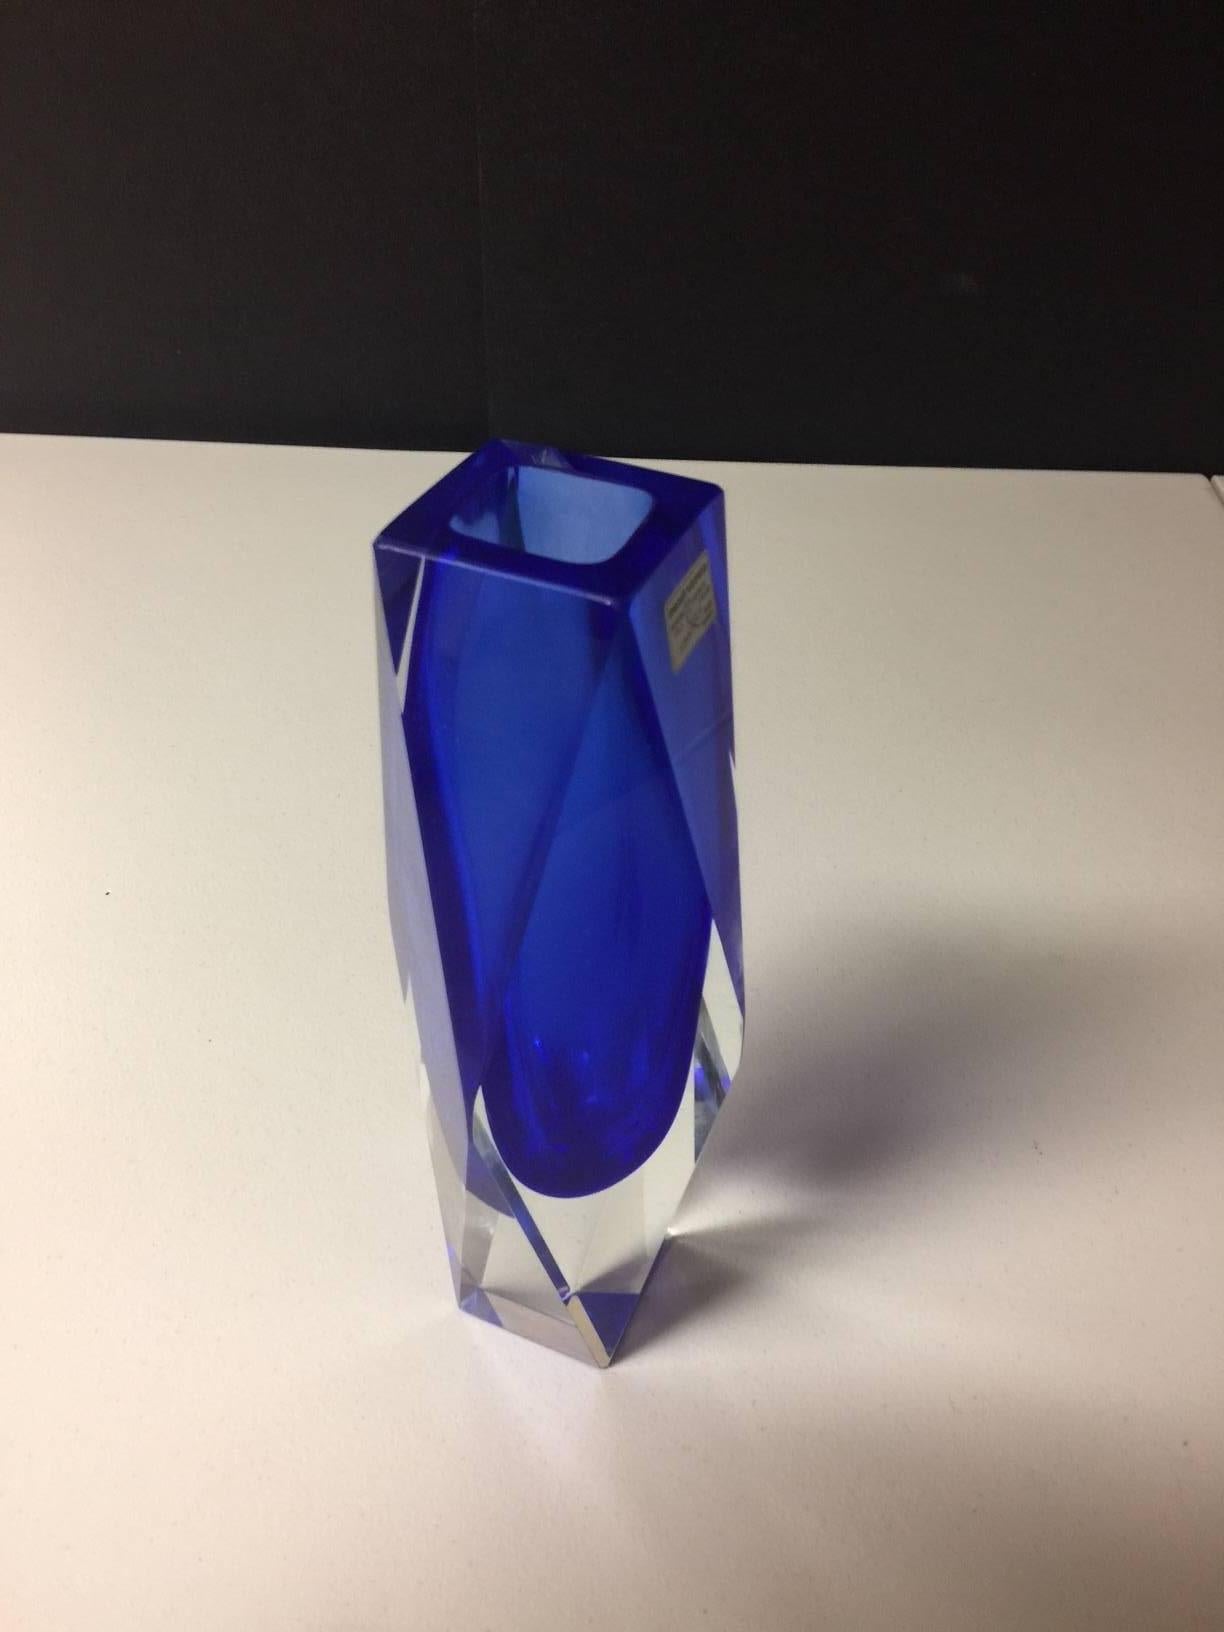 Stunning Murano Glass Sommerso Faceted Vase by Mandruzzato 1